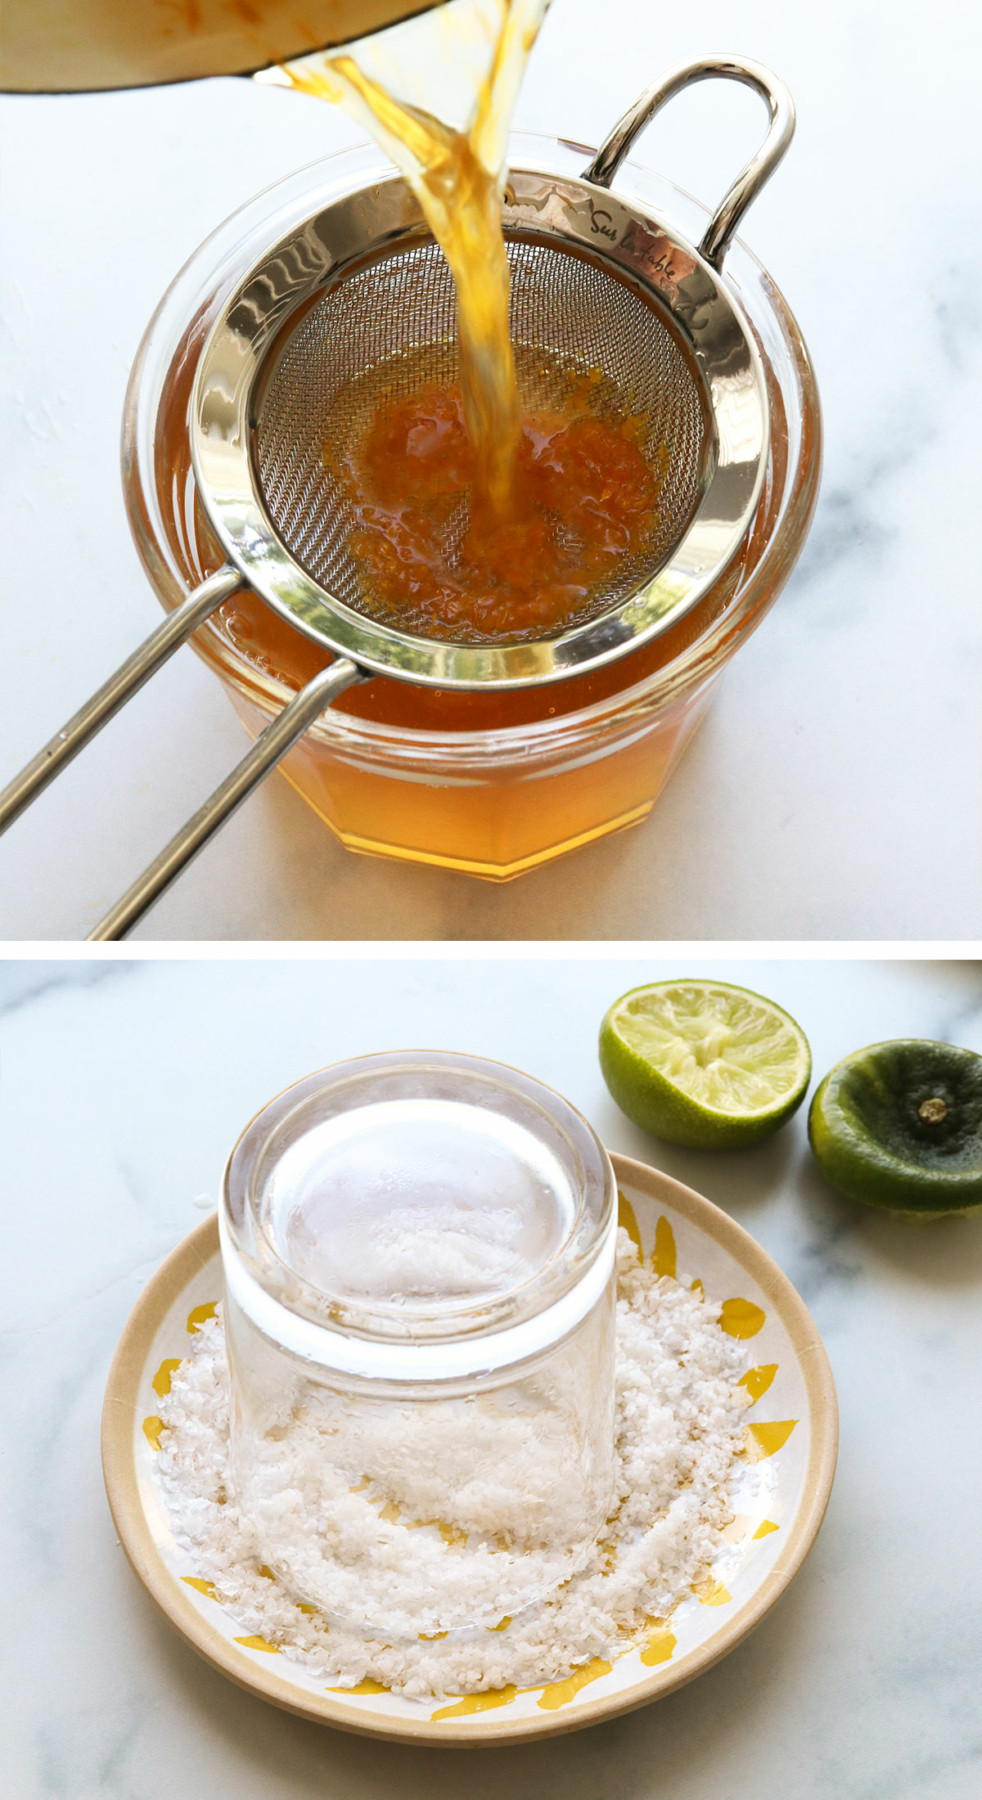 simple syrup strained into a glass jar and a glass upside down on a plate of salt.